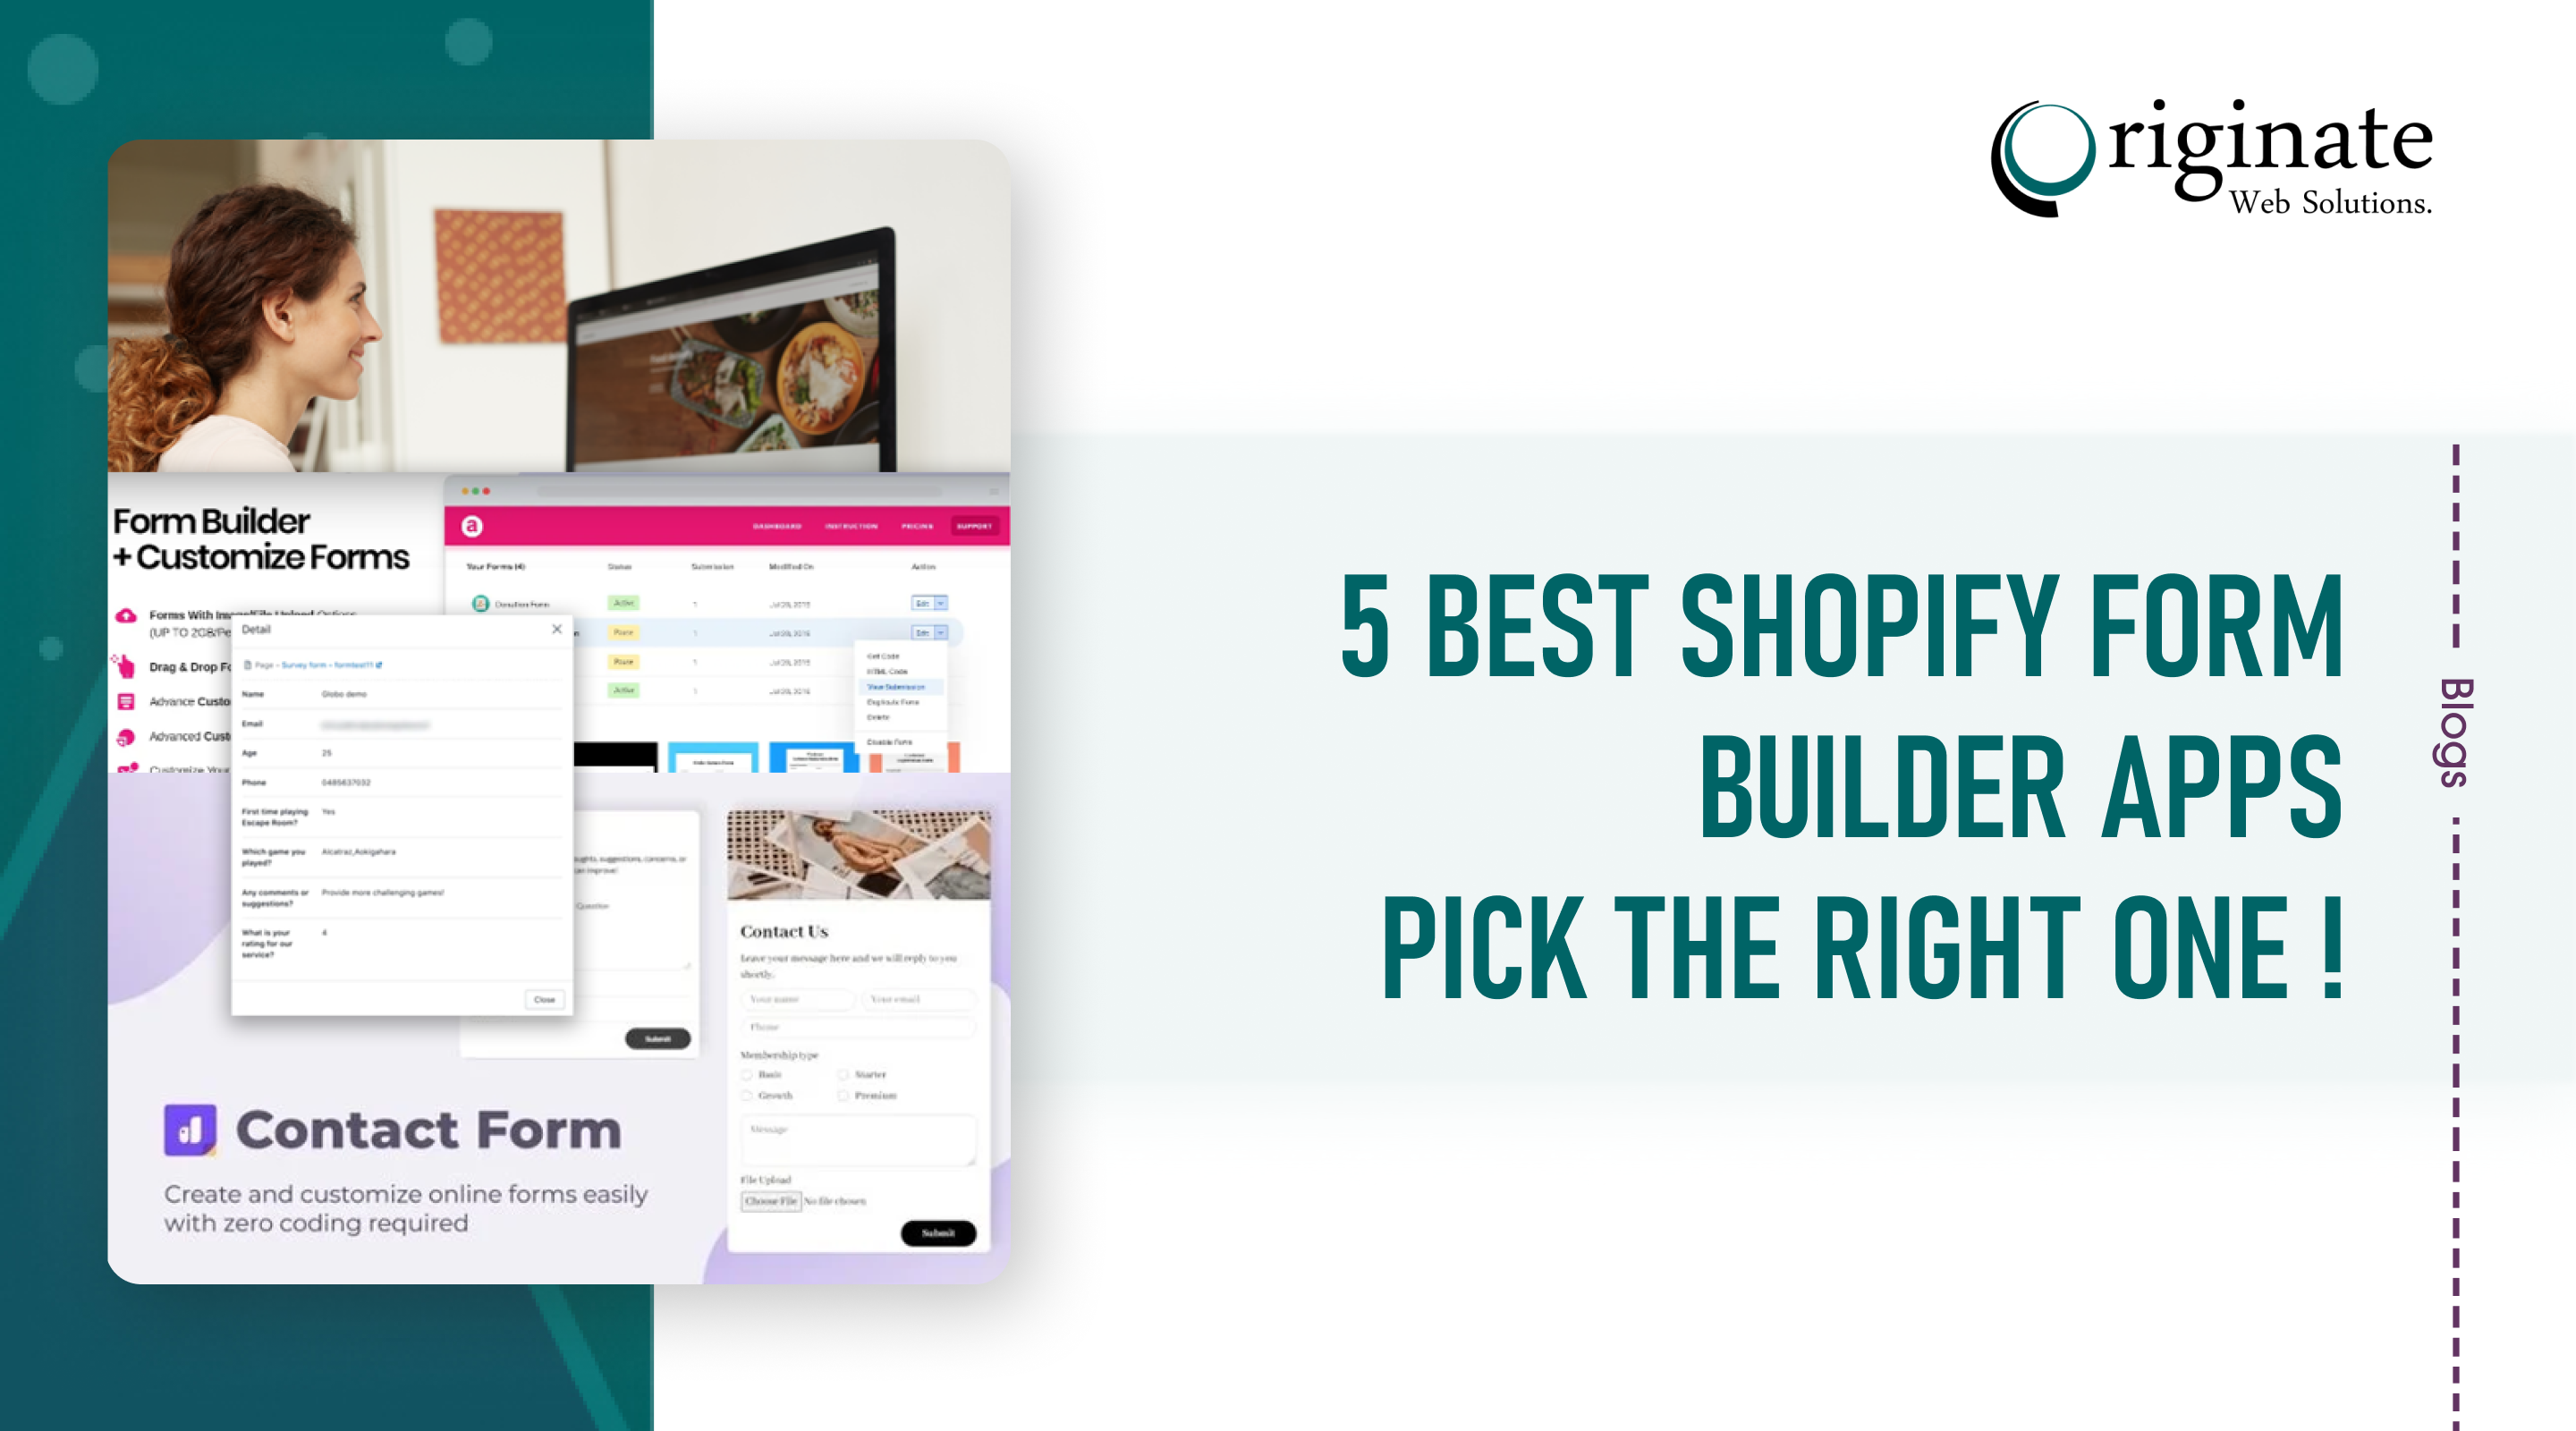 5 Best Shopify Form